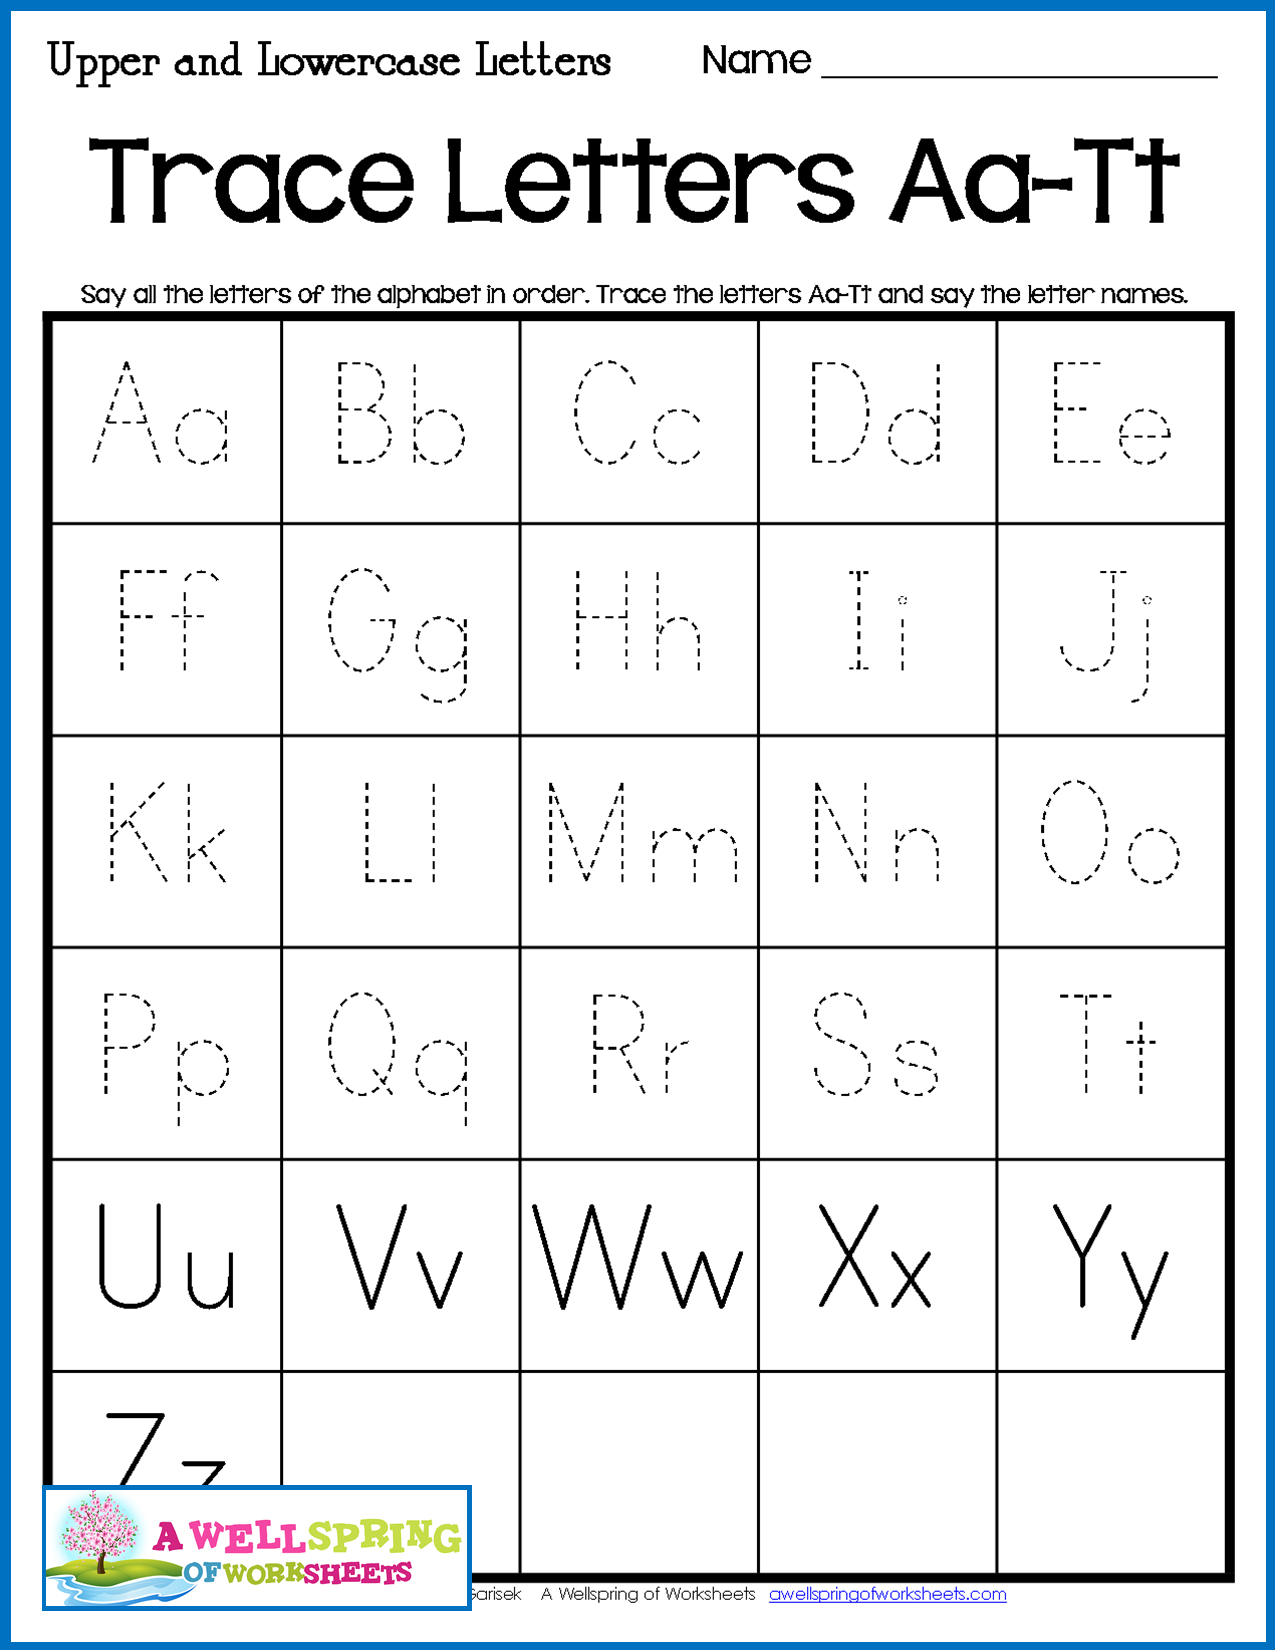 Alphabet Tracing Worksheets - Uppercase &amp;amp; Lowercase Letters inside Capital And Lowercase Letters Tracing Worksheets